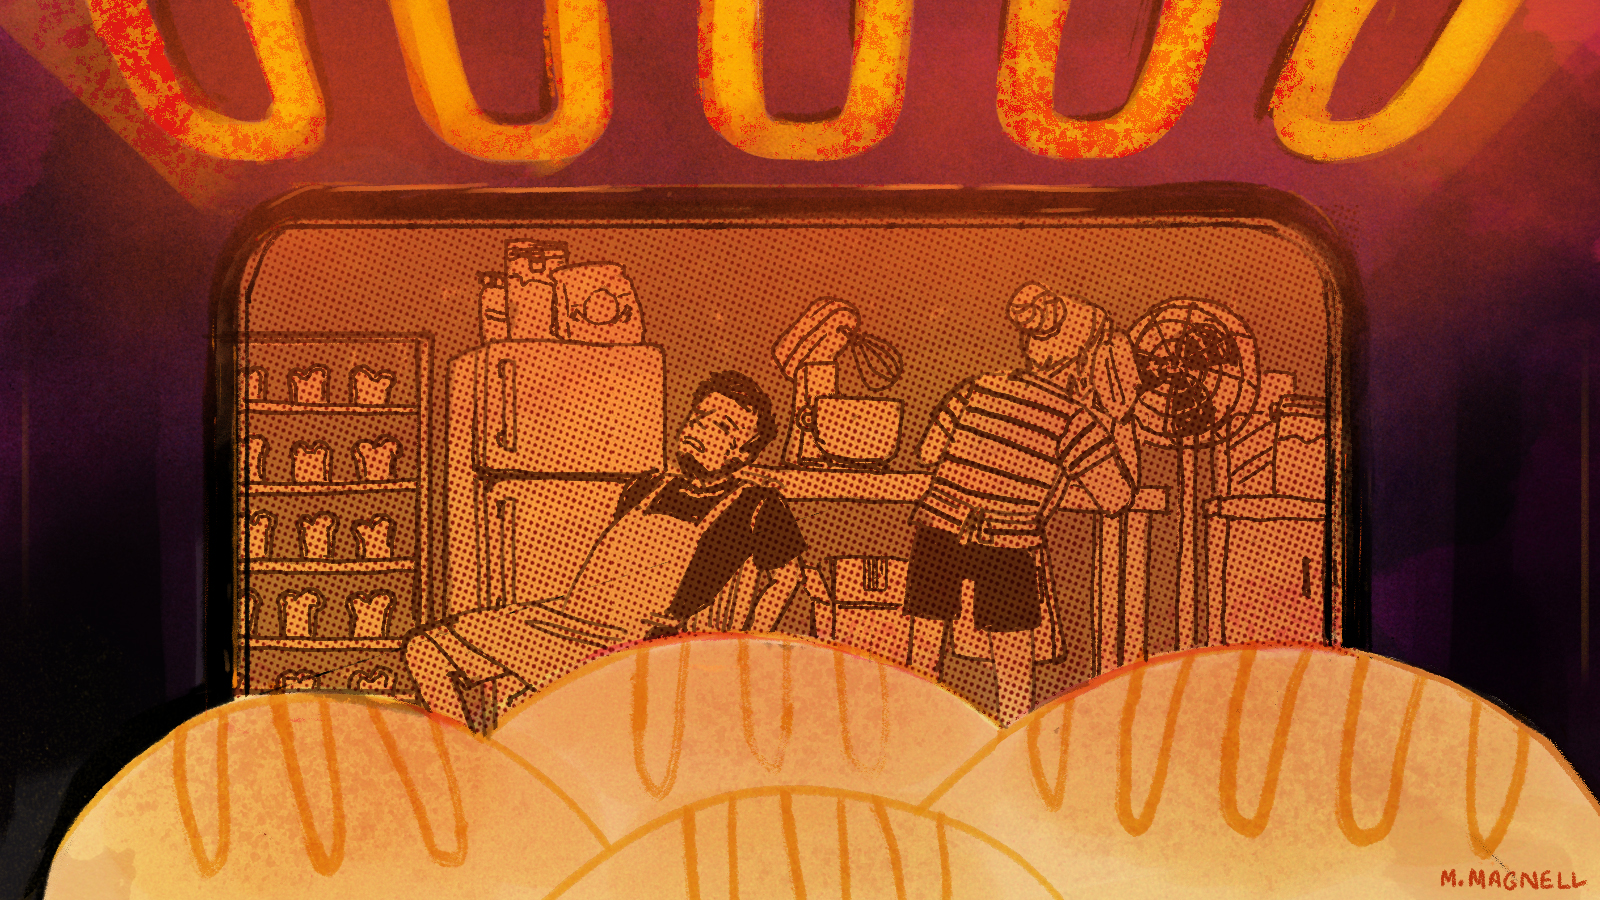 Bread bakes in a red-hot oven. Through the oven door we see bakers sweating in the heat. Illustration.